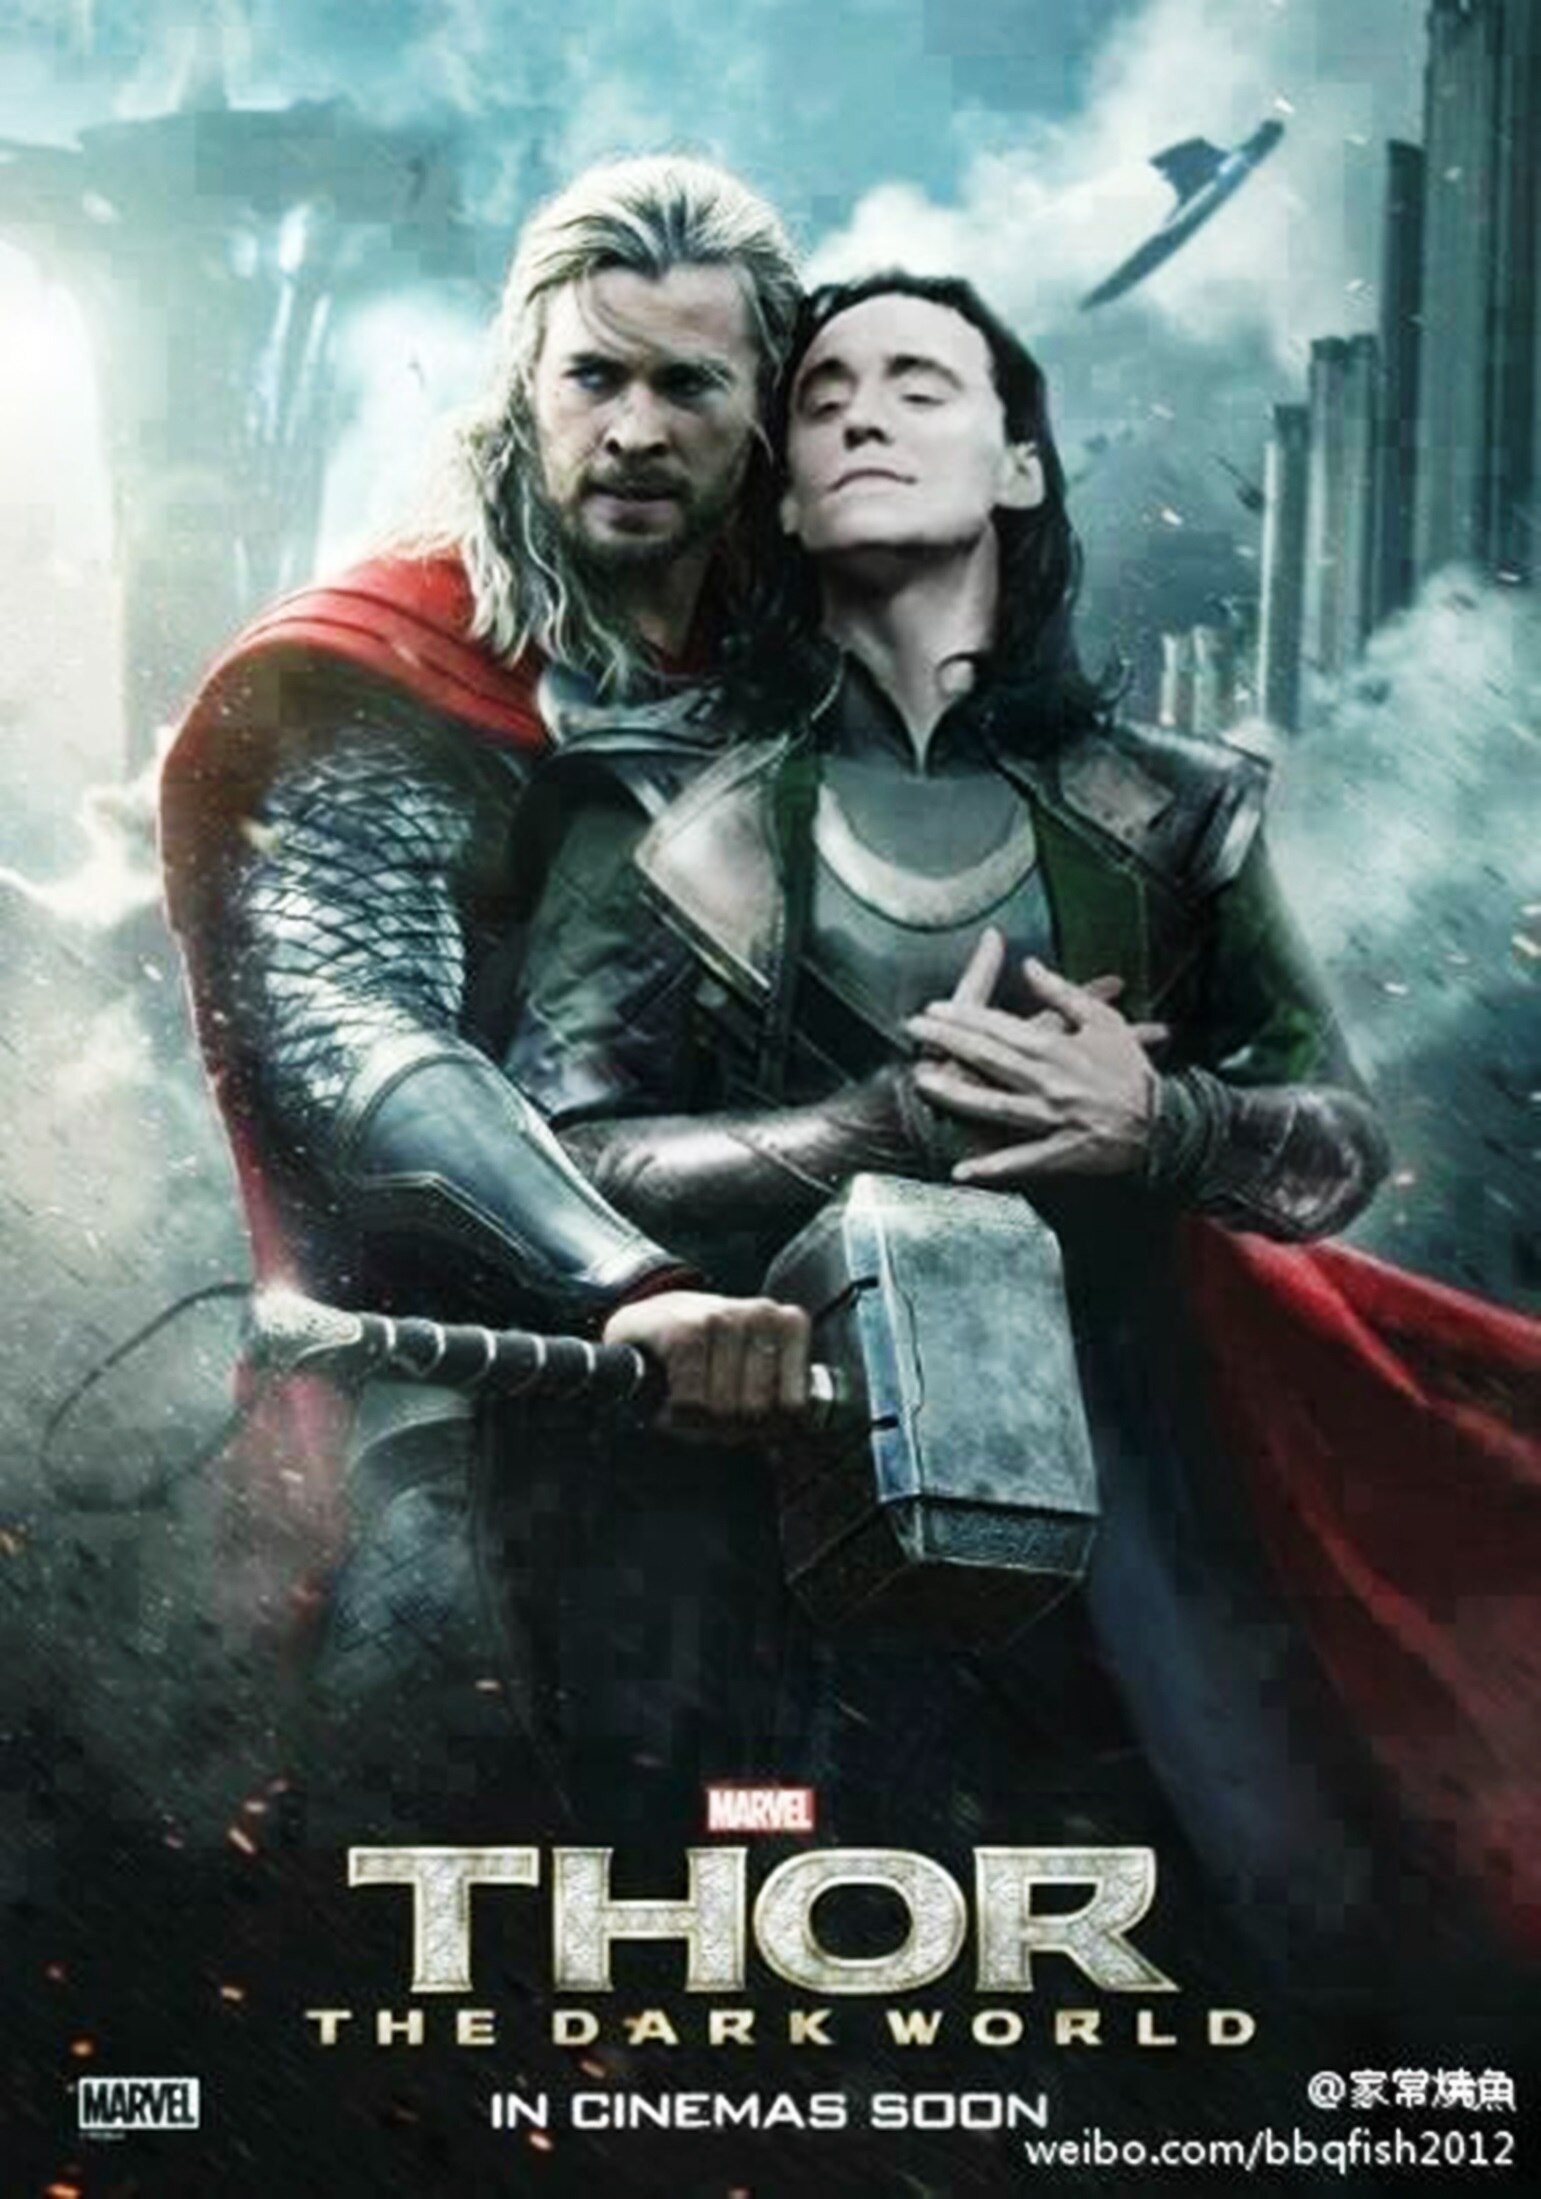 Déguisement Luxe Thor™ Love and Thunder - Adulte